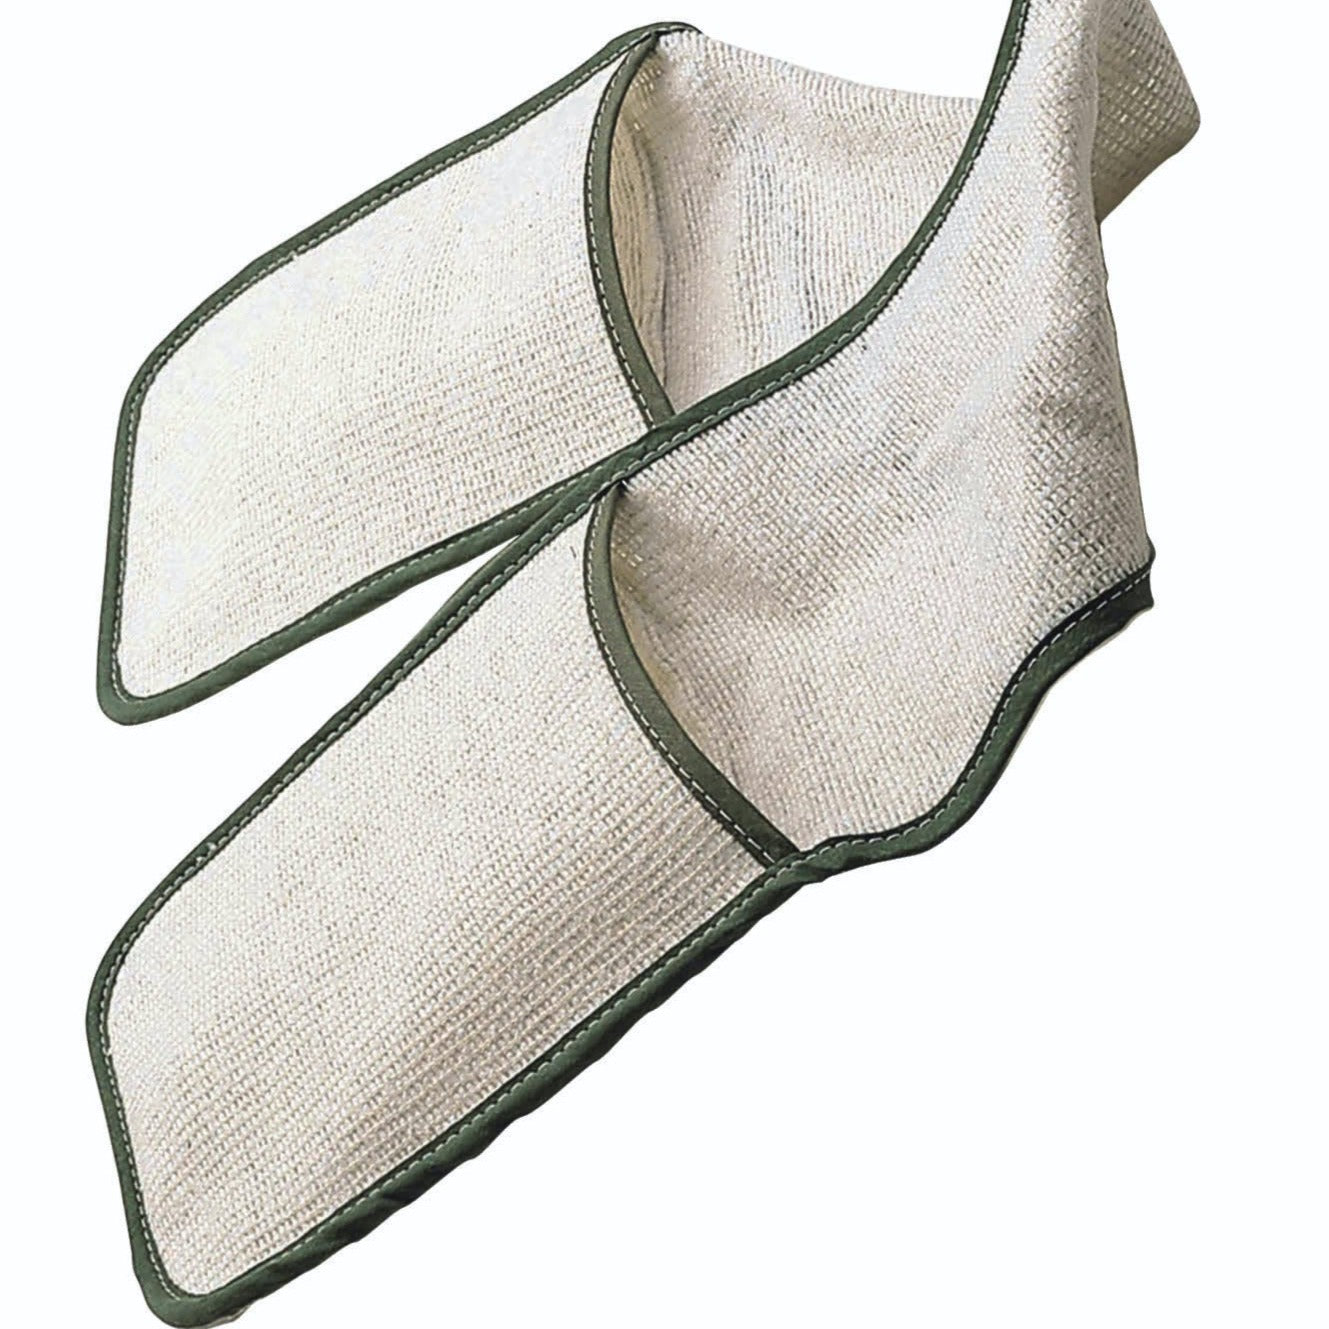 Heavy Duty Oven Gloves with Bound Edge